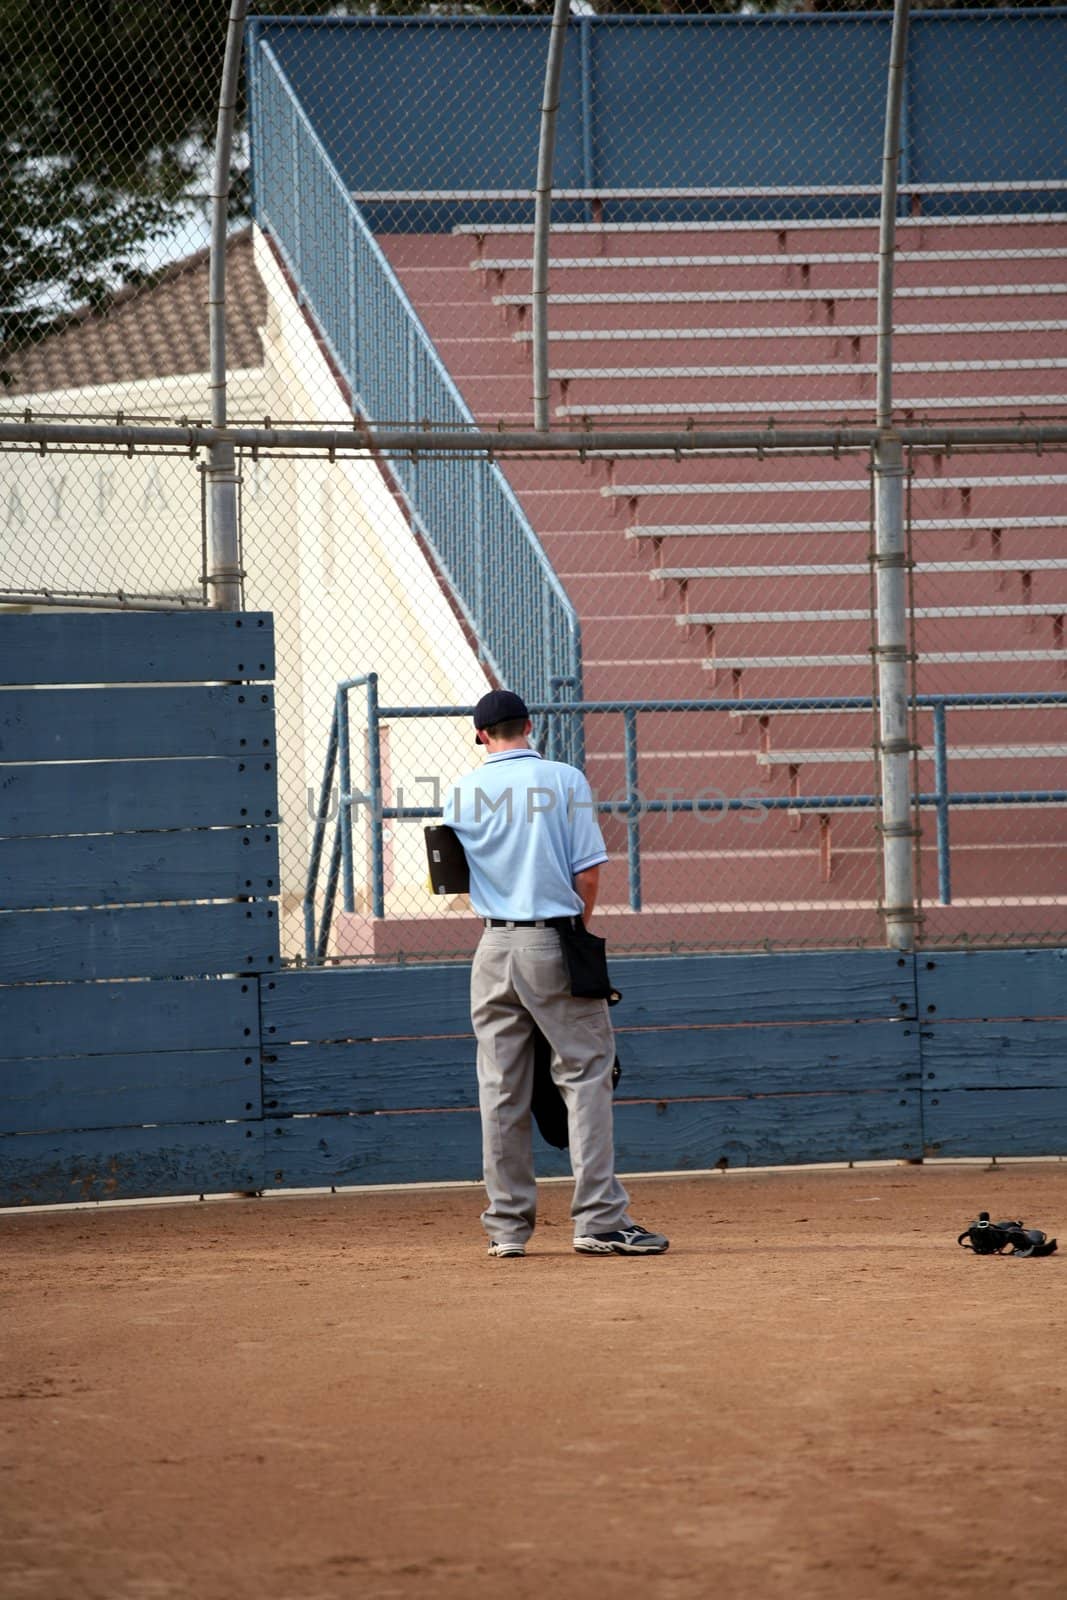 Umpire alone on the field